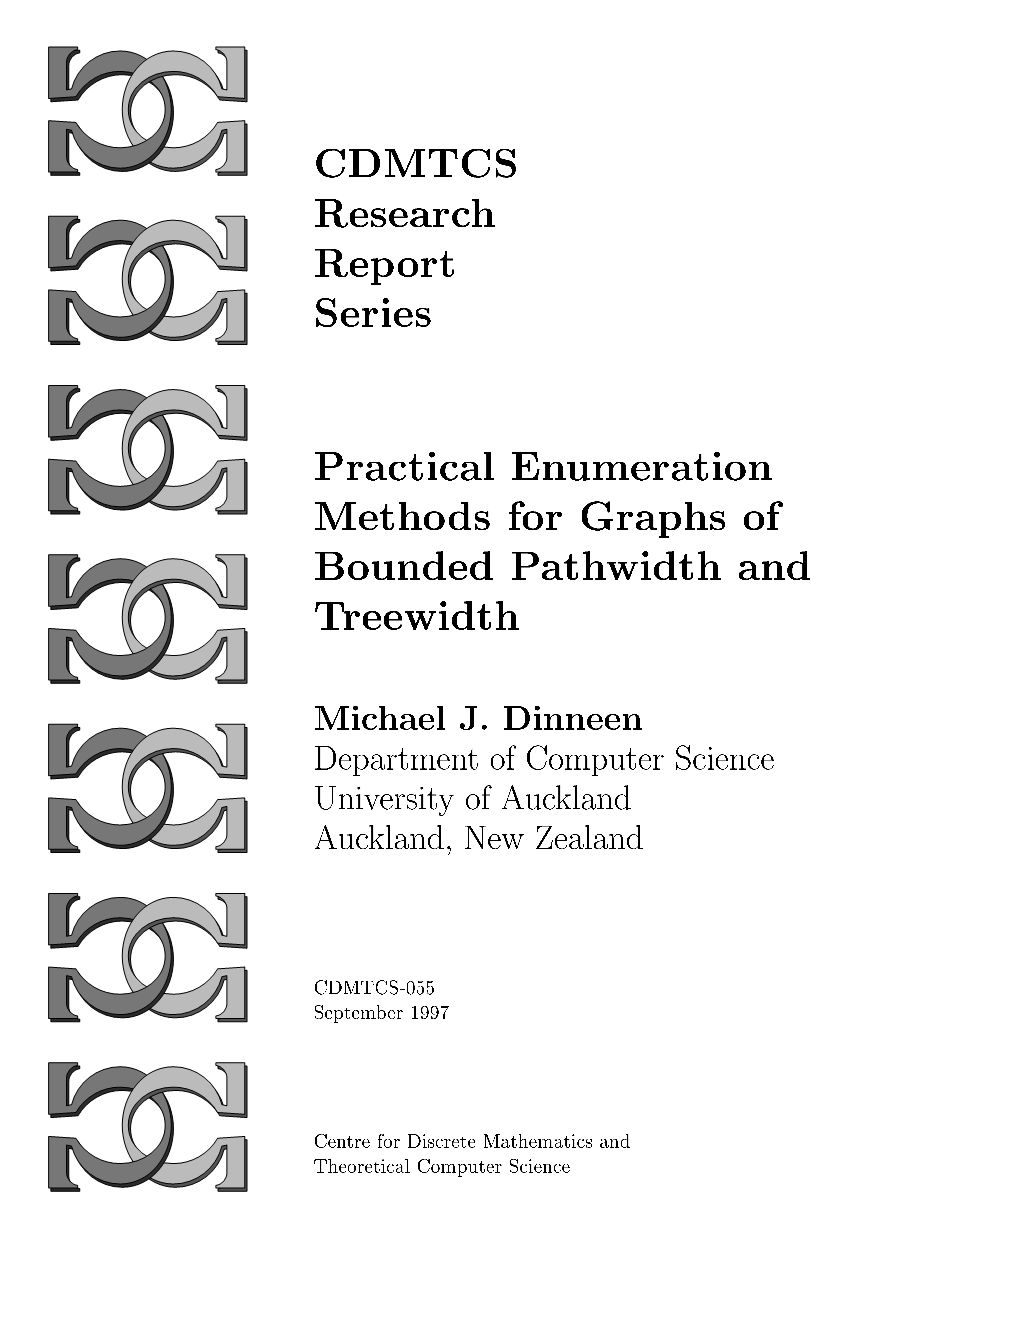 CDMTCS Research Report Series Practical Enumeration Methods for Graphs of Bounded Pathwidth and Treewidth